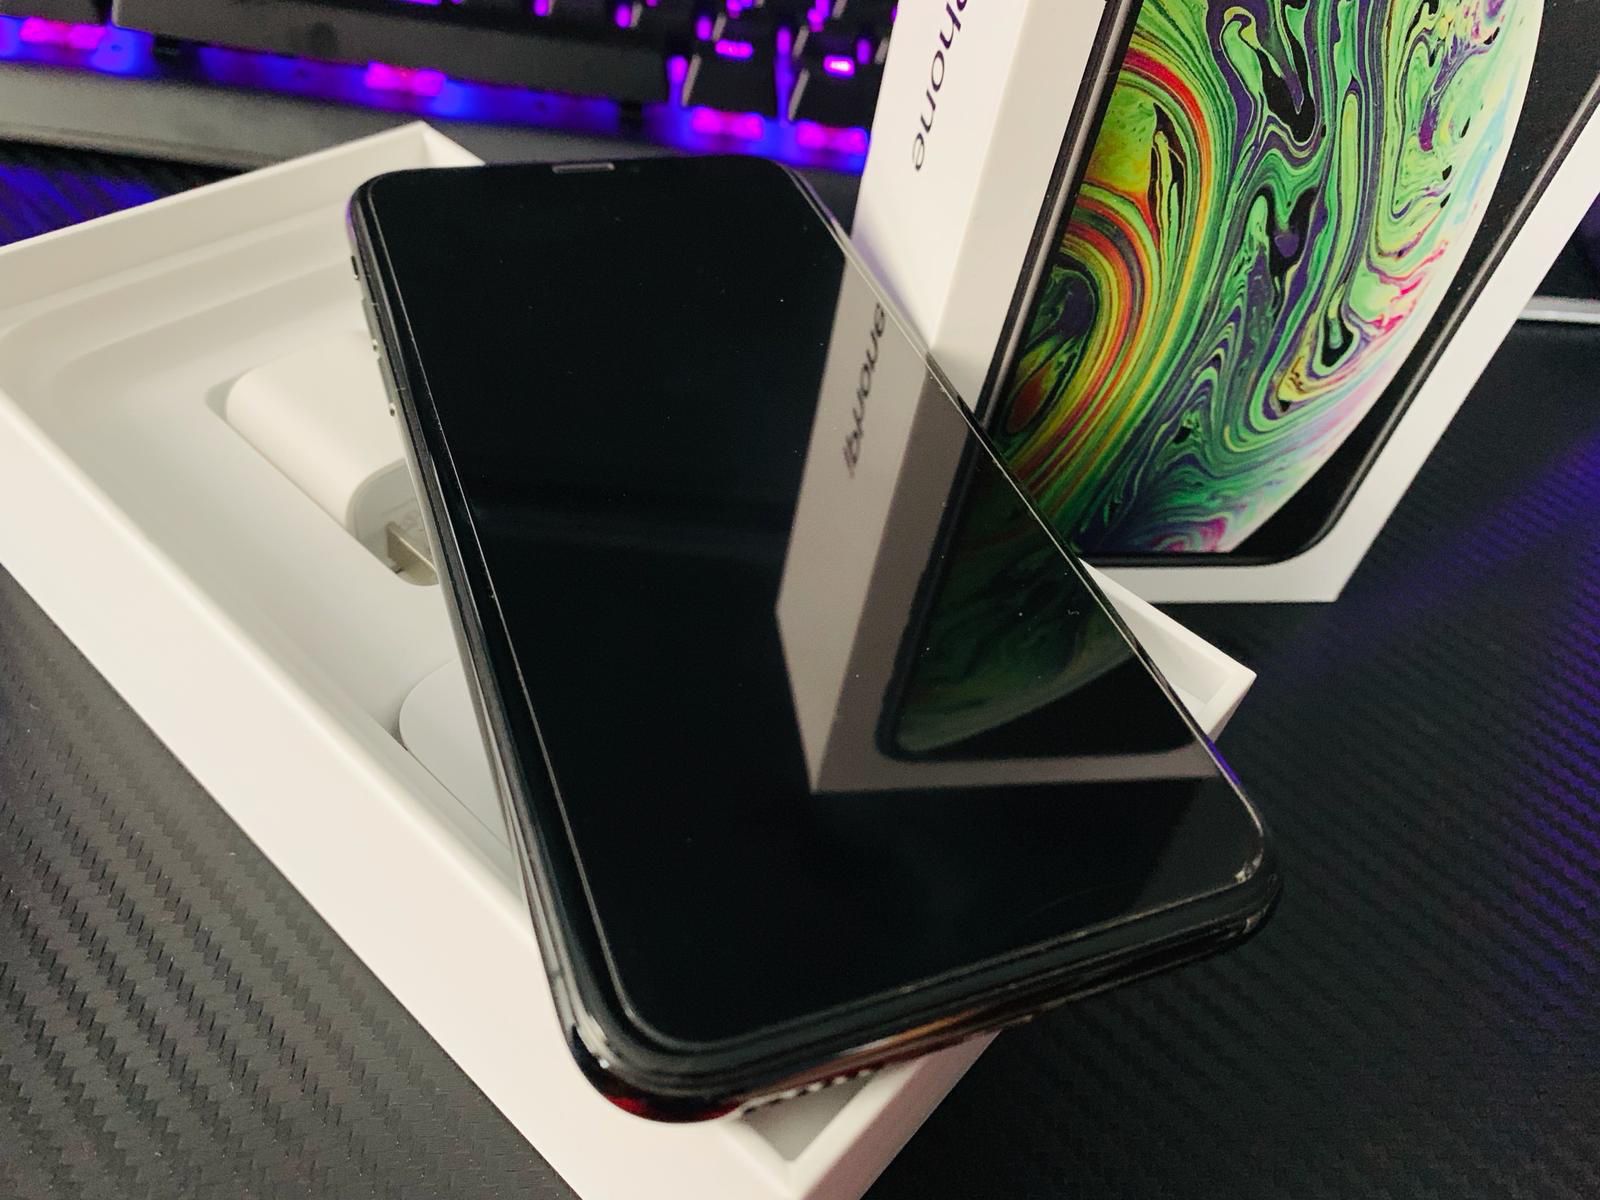 iPhone X 64gb unlocked! With original accessories almost new!! Also come with Apple Watch 42mm protective shell!